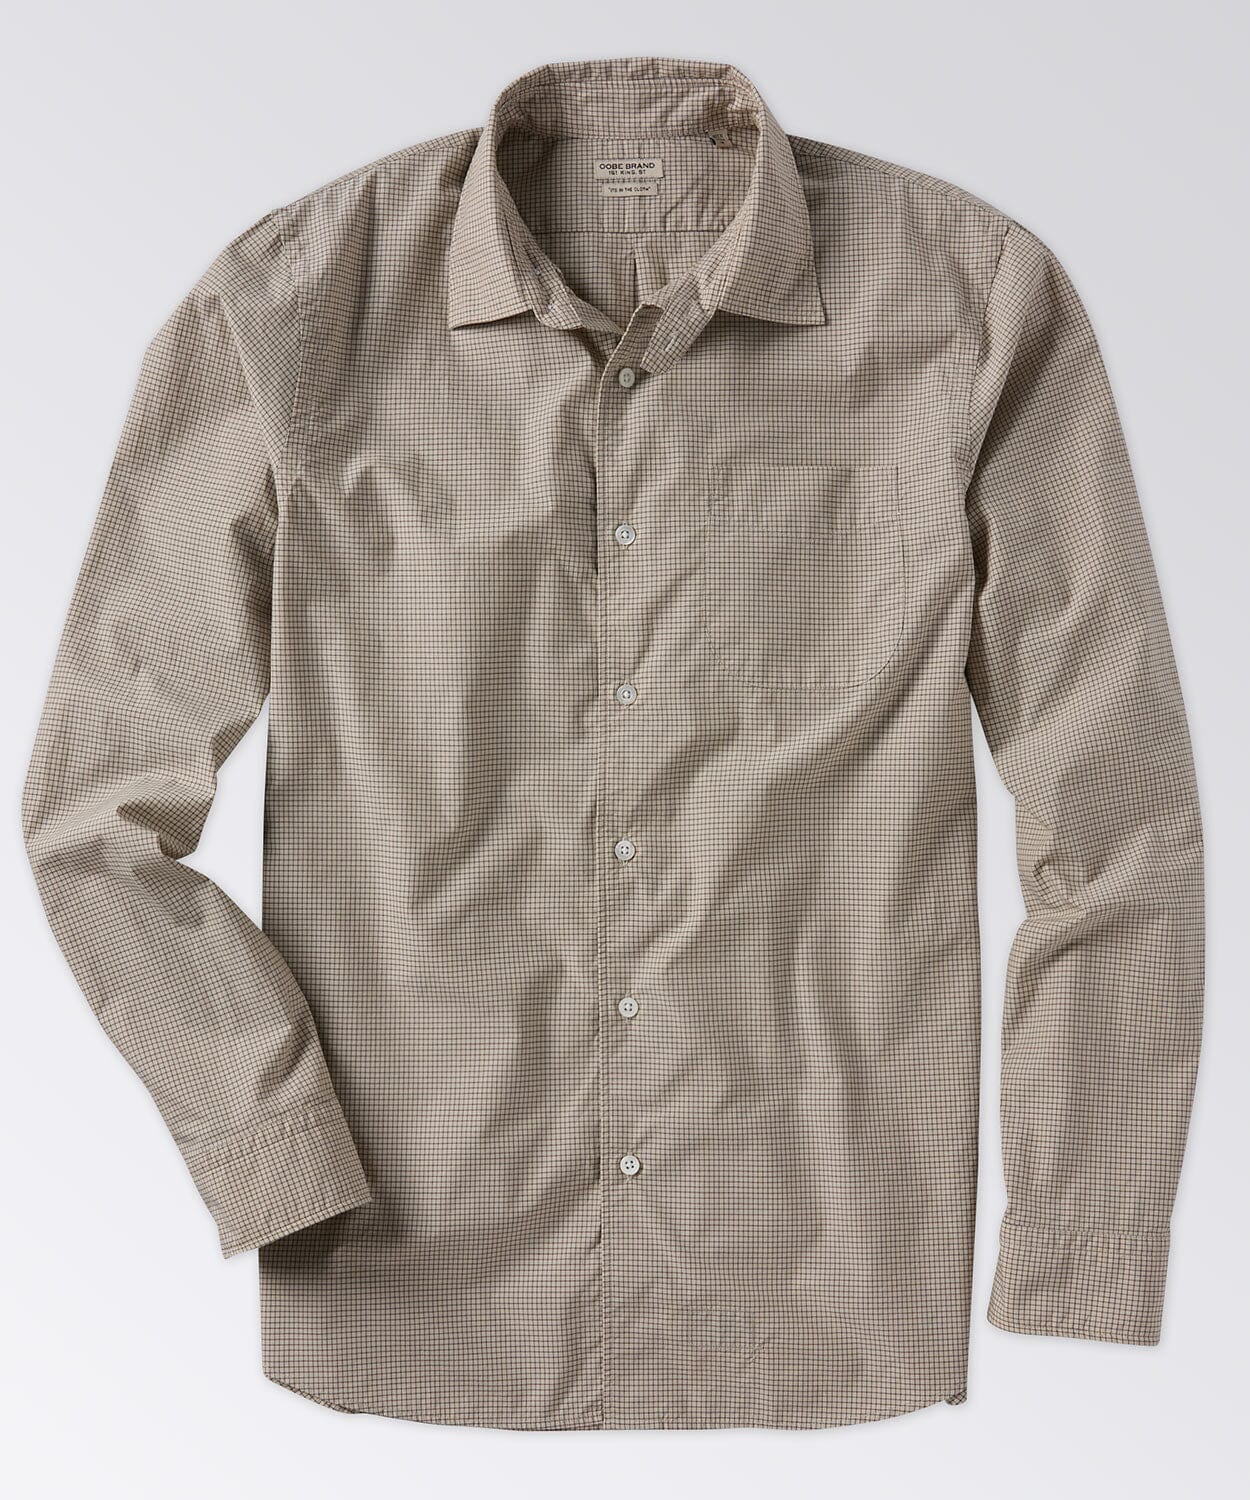 front of mens button down shirt